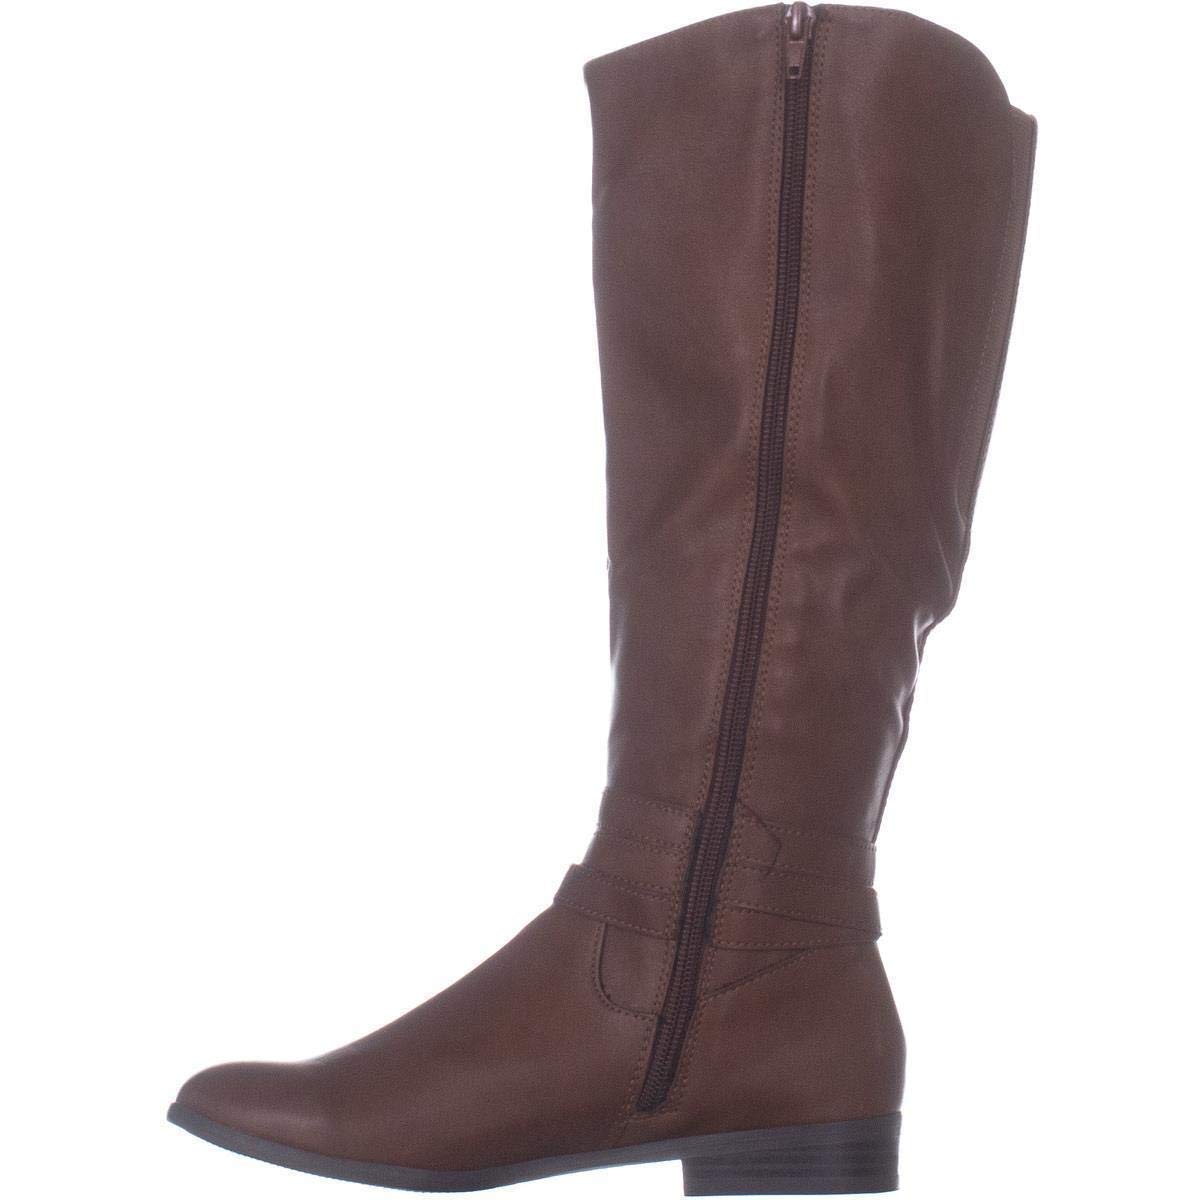 Style & Co Women's Shoes Jomaris Closed Toe Knee High Fashion Boots 